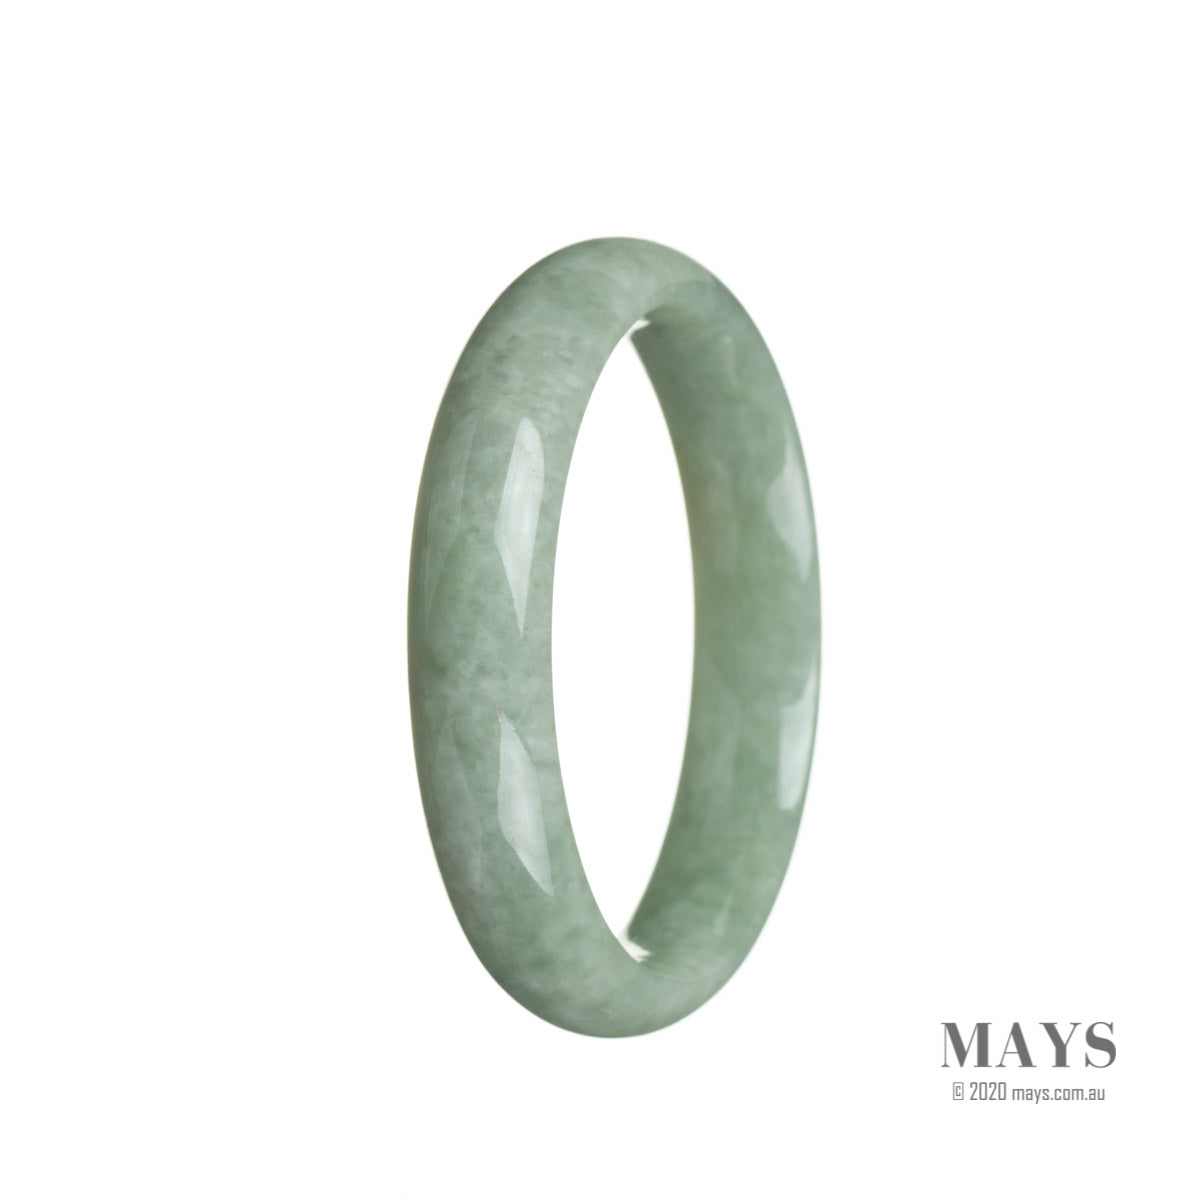 A beautifully crafted half moon shaped bangle made of certified natural green Burma jade, perfect for adding an elegant touch to any outfit.